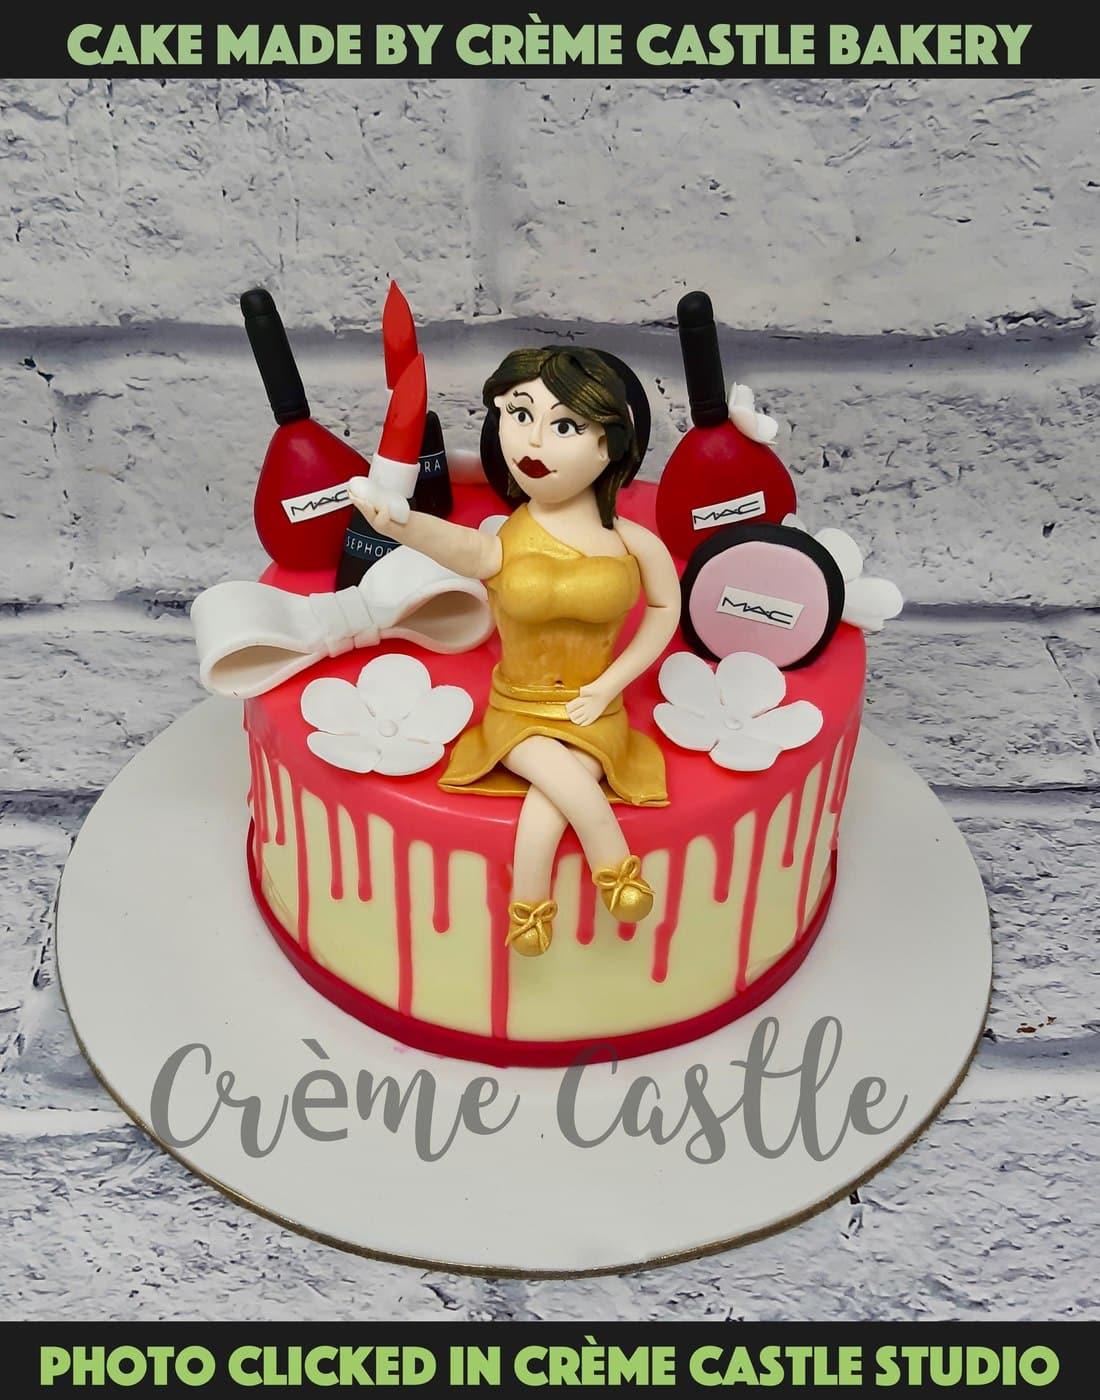 Beauty and Selfie cake - Creme Castle